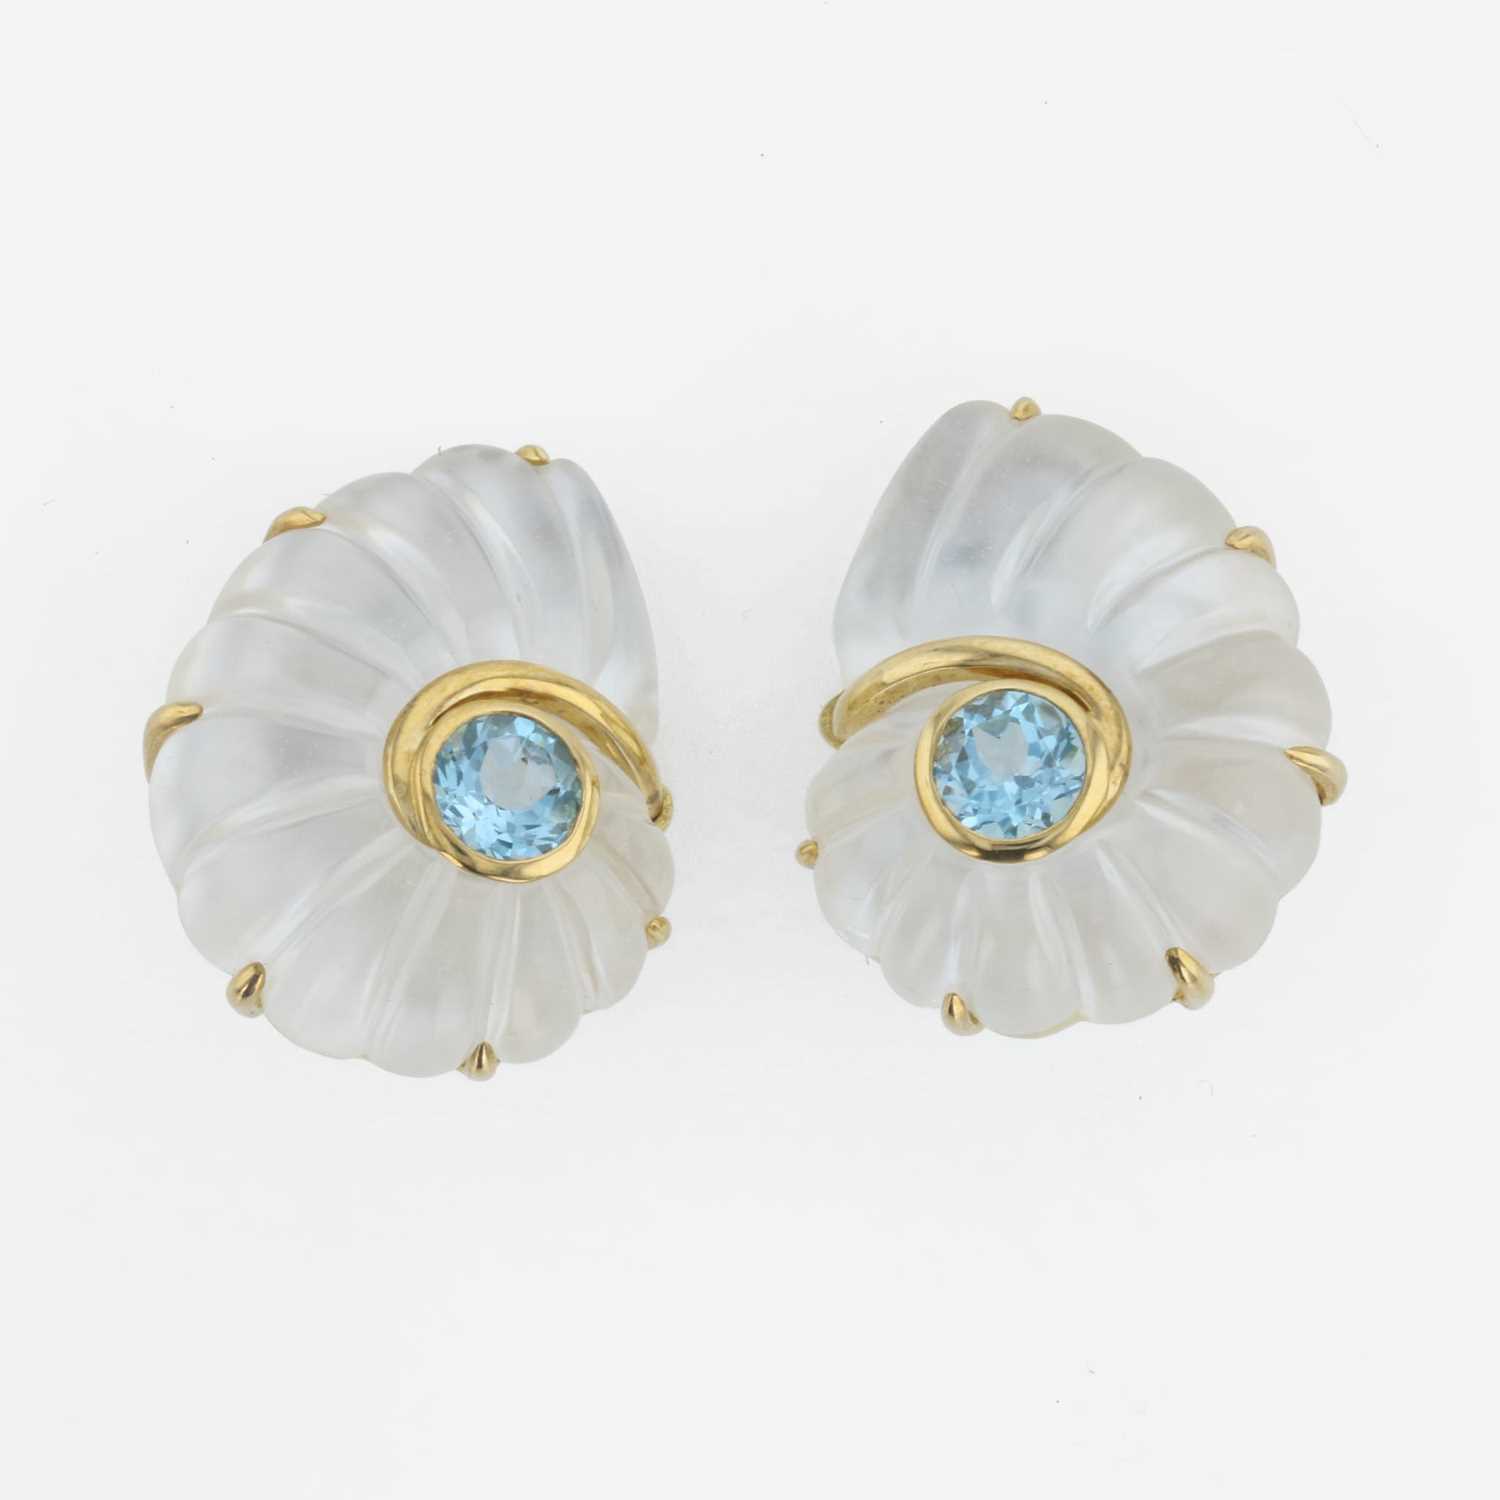 Lot 51 - A pair of 18K yellow gold, rock crystal, and blue topaz ear clips, Trianon